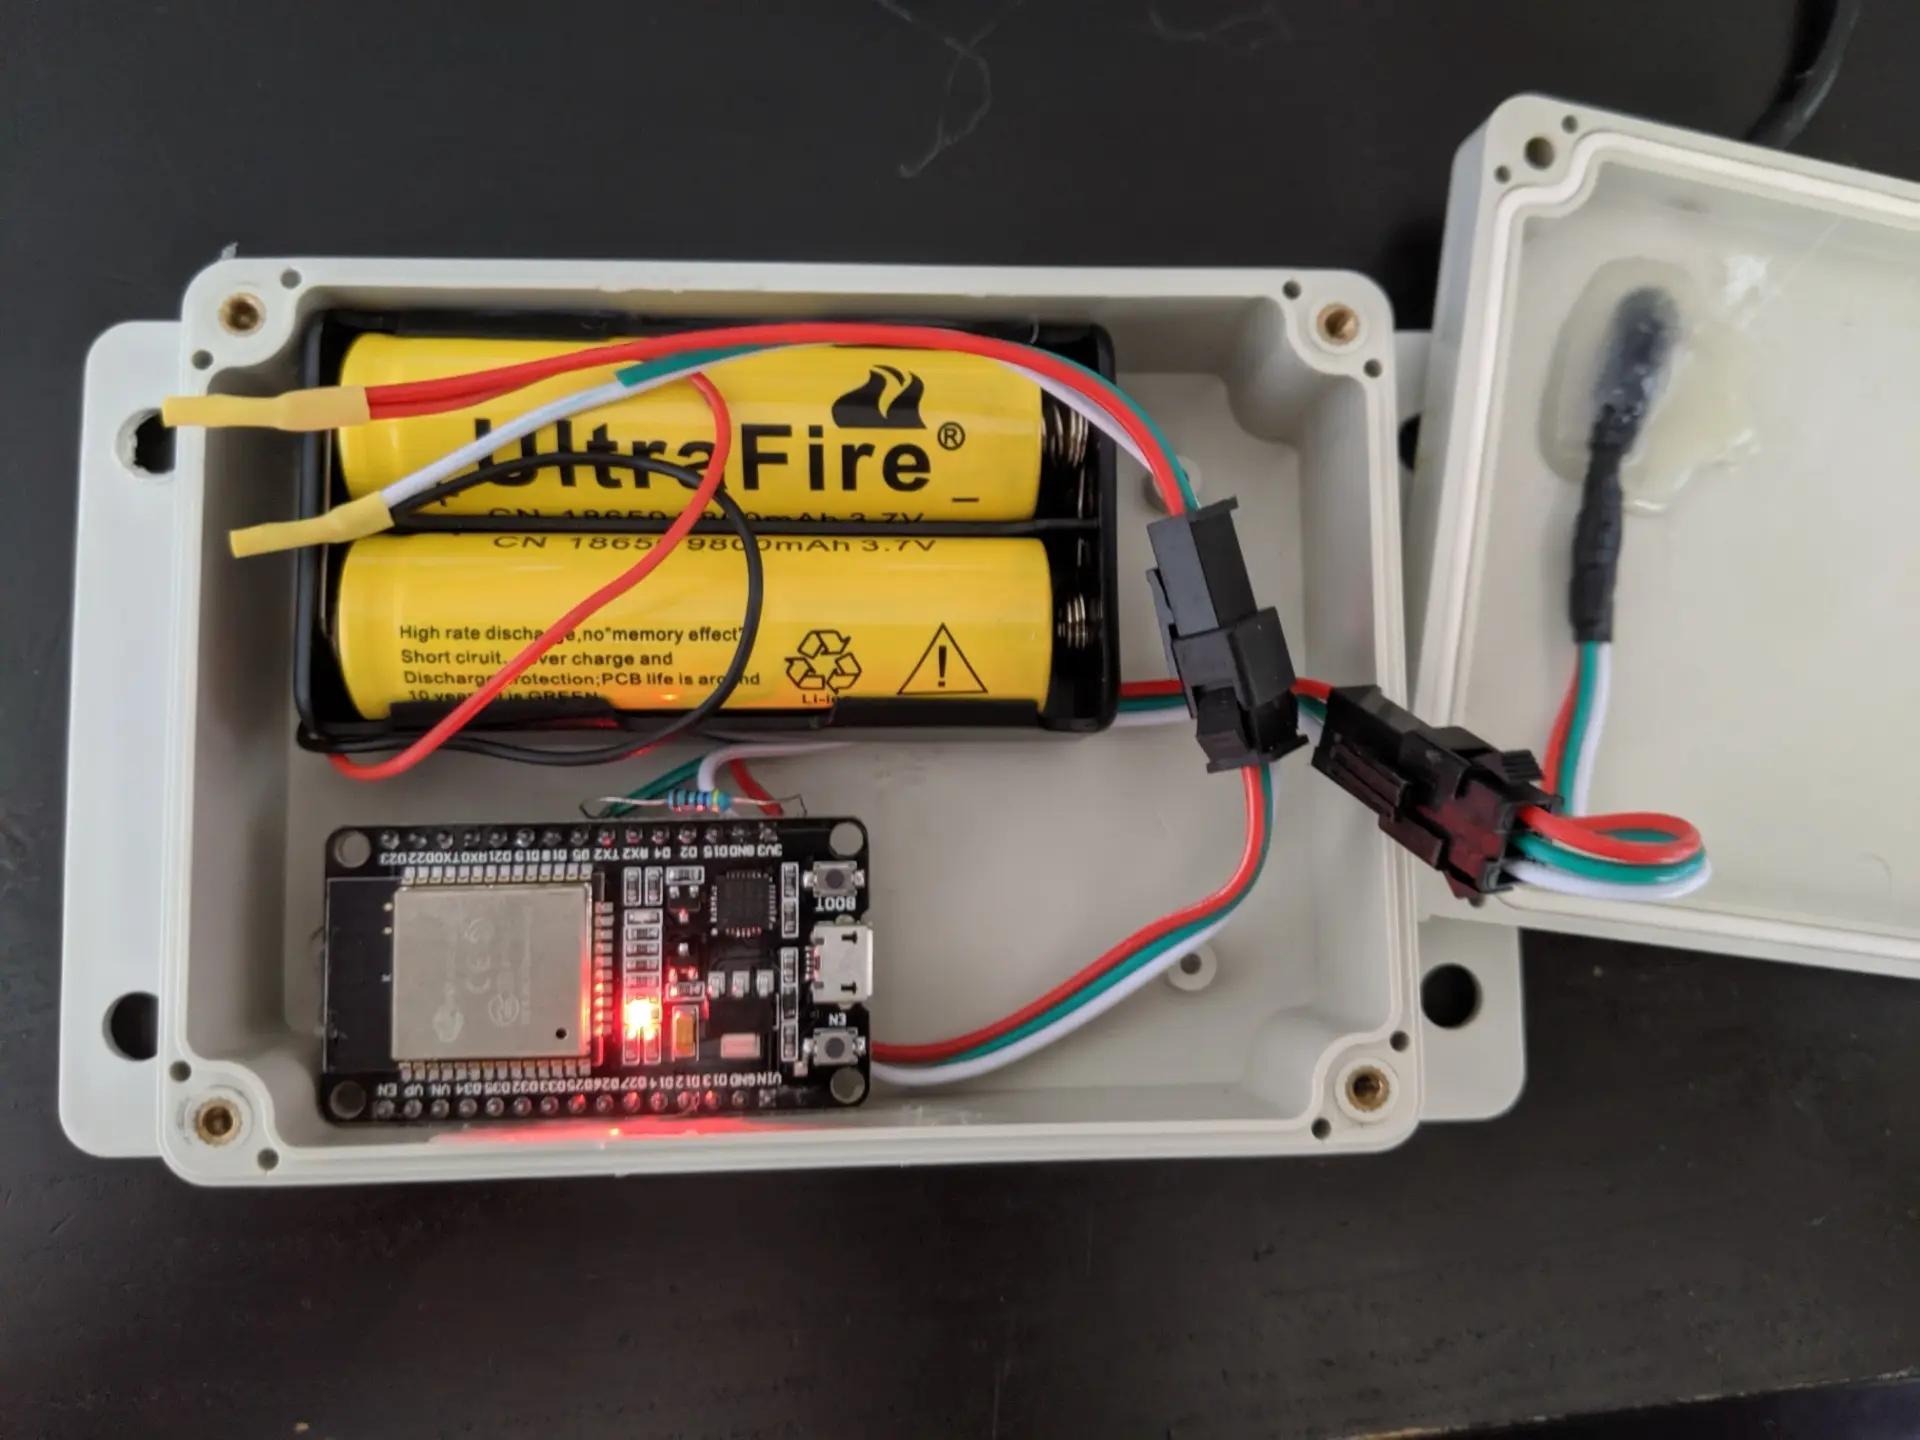 An esp32 in a project enclosure with two 18650 batteries in a simple battery case